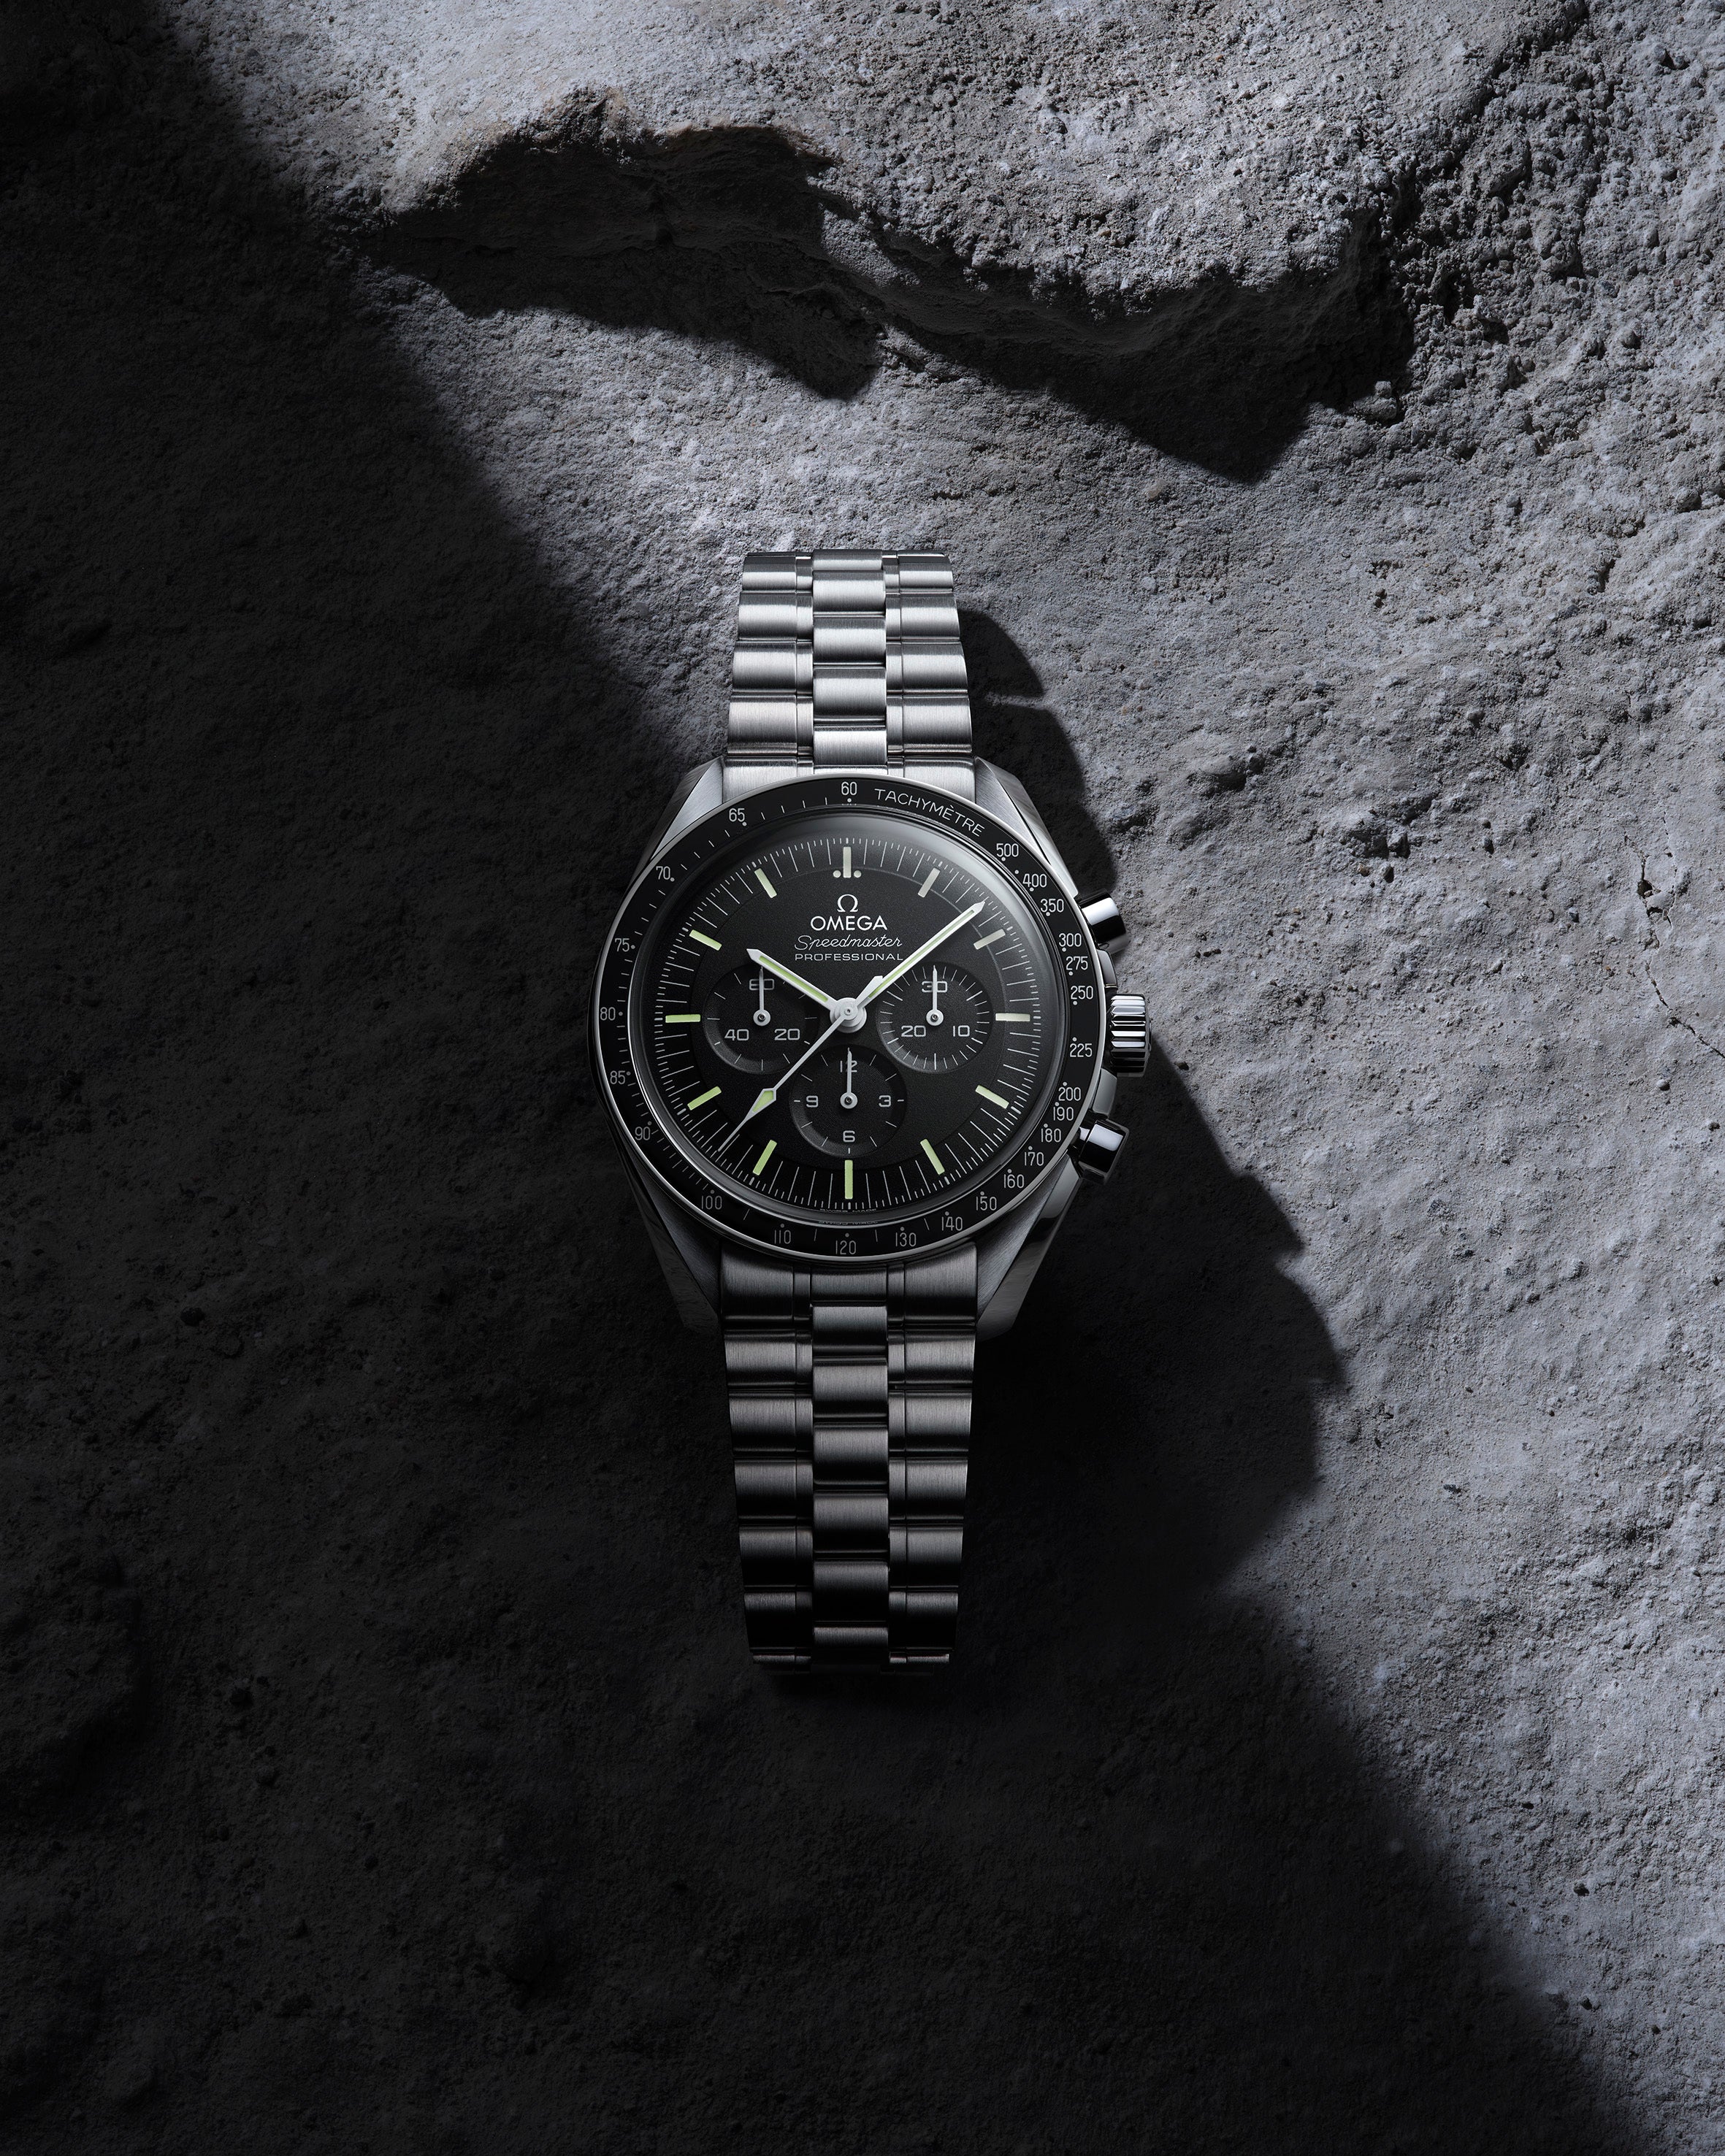 Moonwatch now Master Chronometer Certified